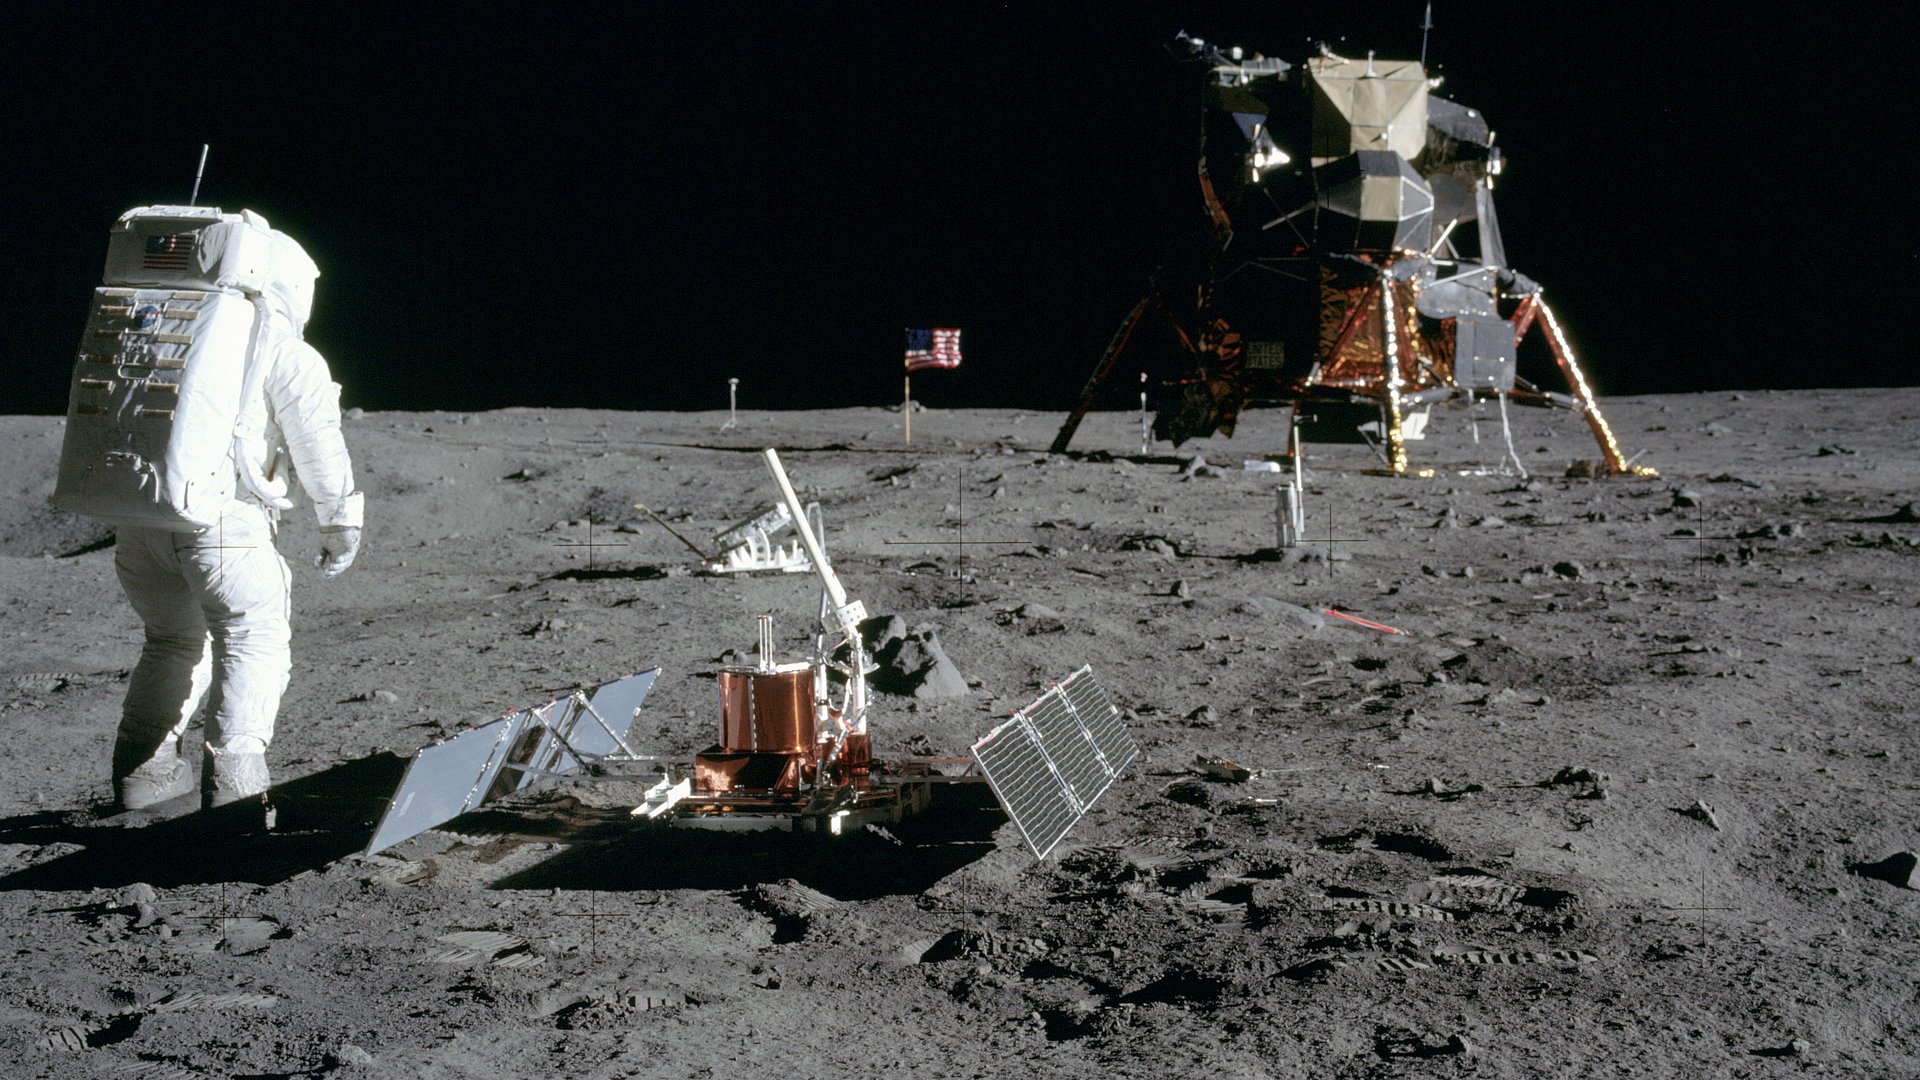 The historical photo shows Buzz Aldrin, who has just built the seismometer on the lunar surface (front). 